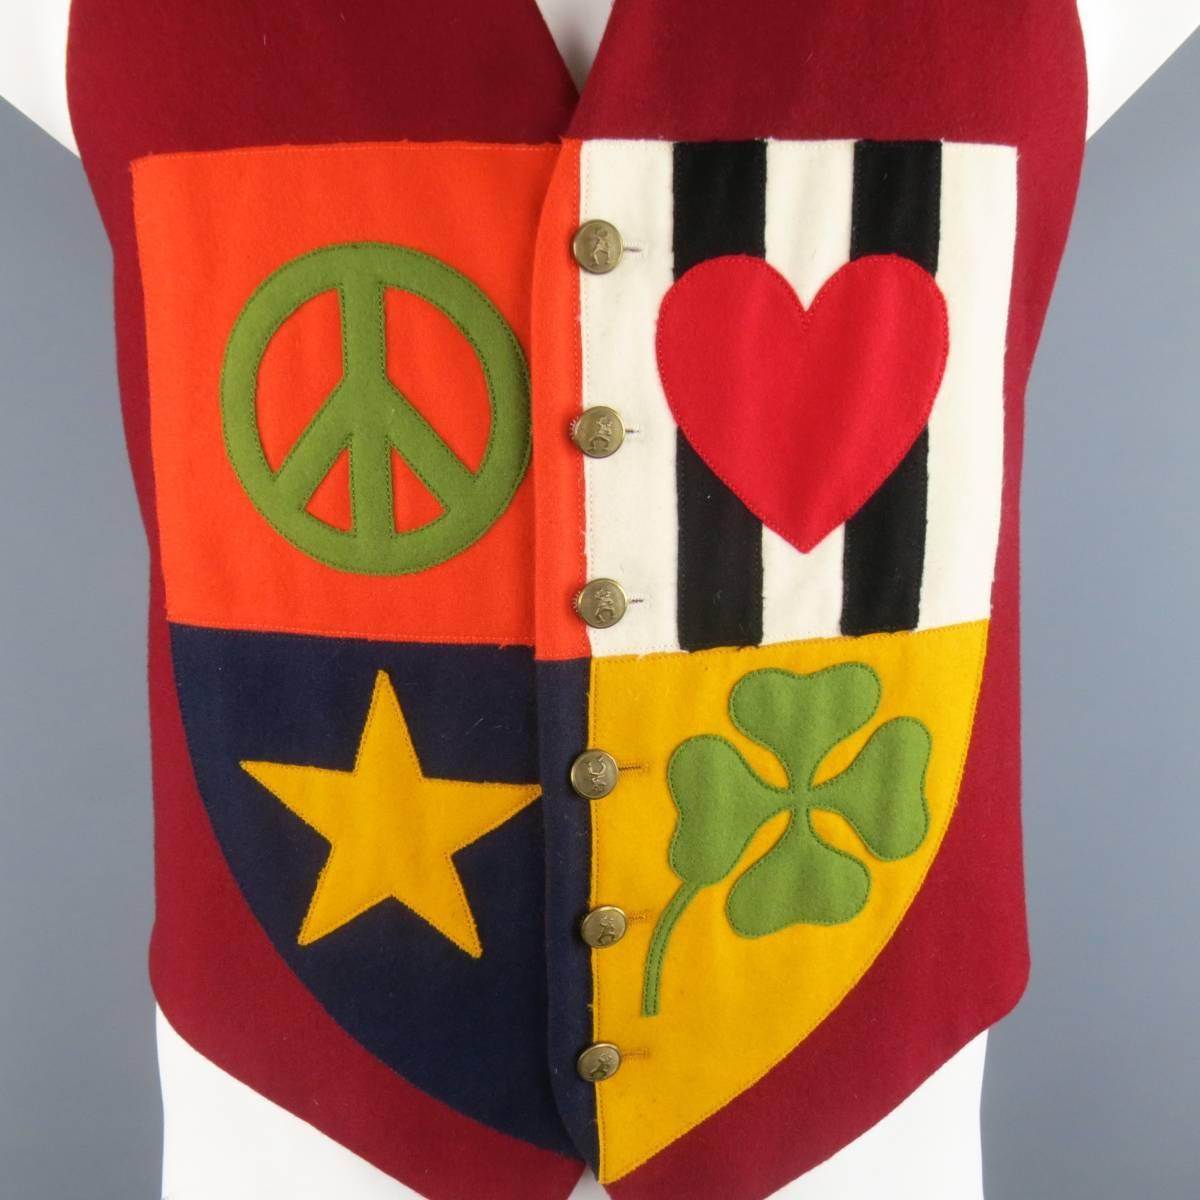 Vintage MOSCHINO Cheap and Chic v neck vest comes in a rich burgundy wool and features an orange, navy, gold, and striped, patchwork crest with peace, heart, star, and clover symbols, and a black and white striped satin back panel. Wear throughout